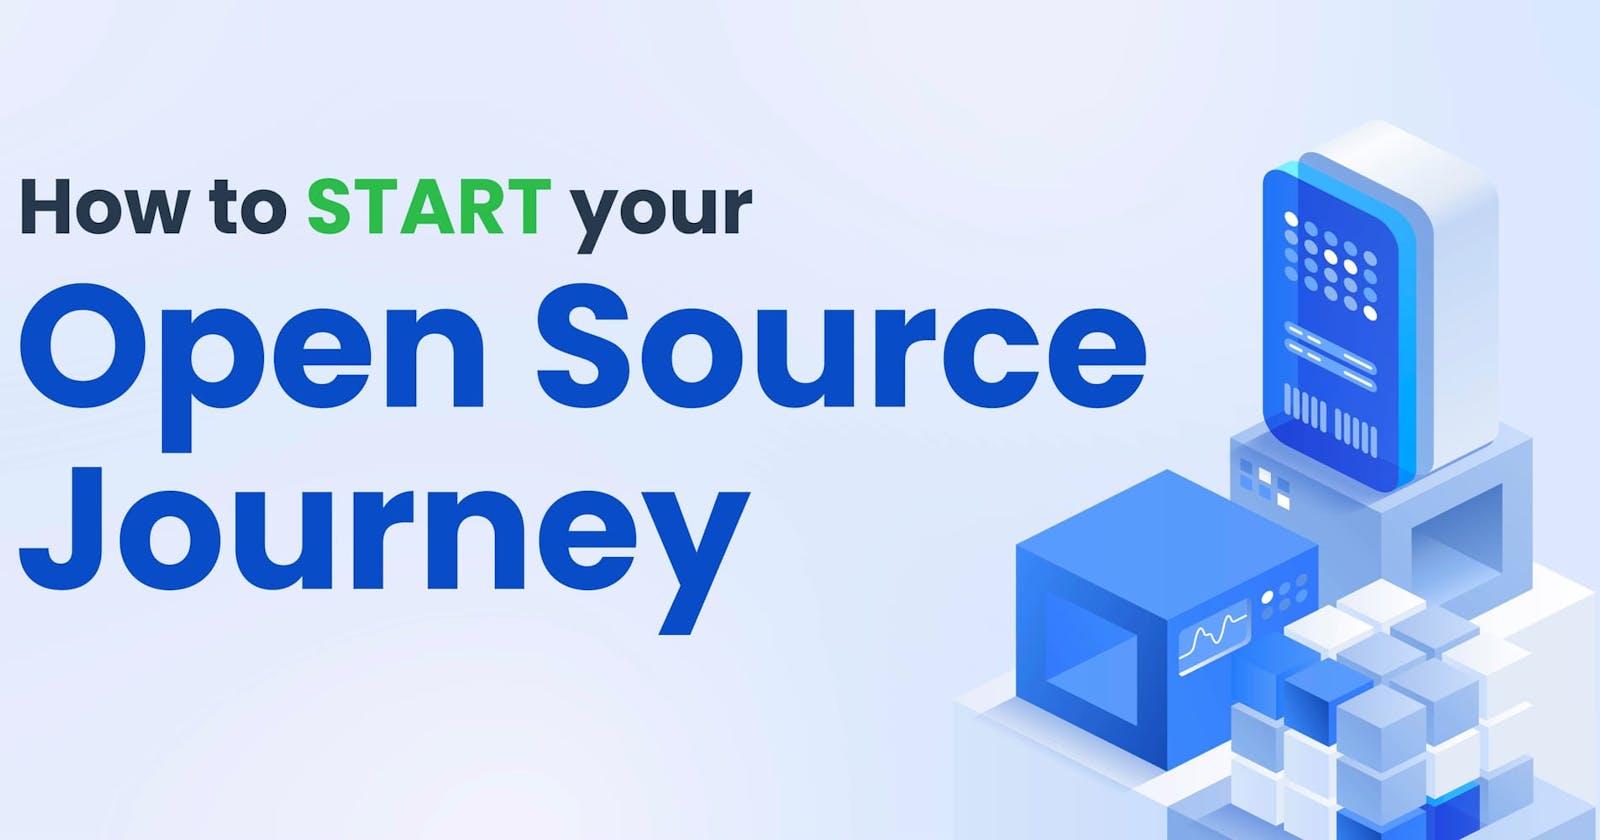 How to start your Open Source journey